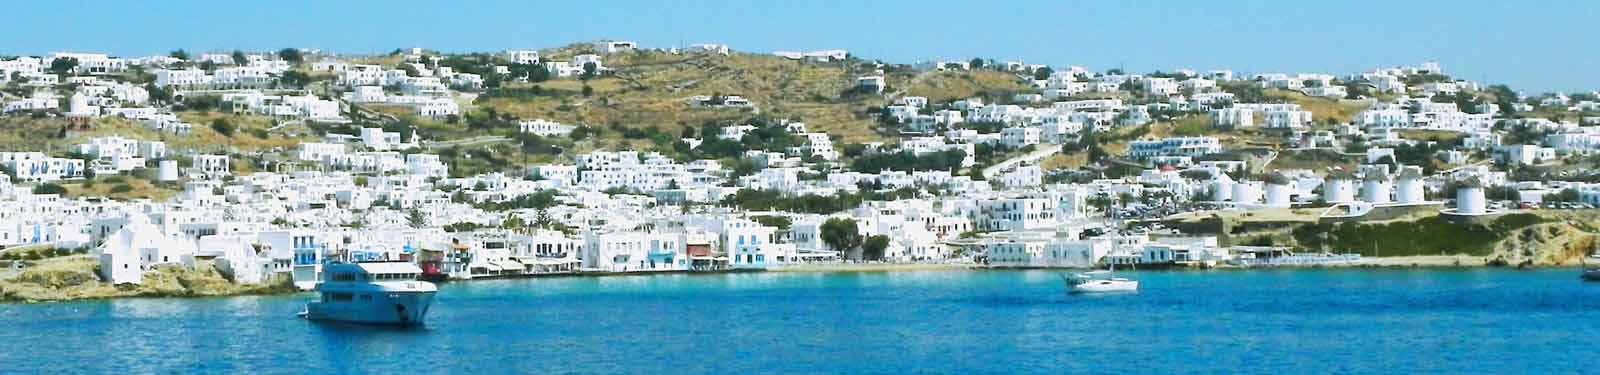 Photo of Panoramic View in Mykonos Cruise Ship Port